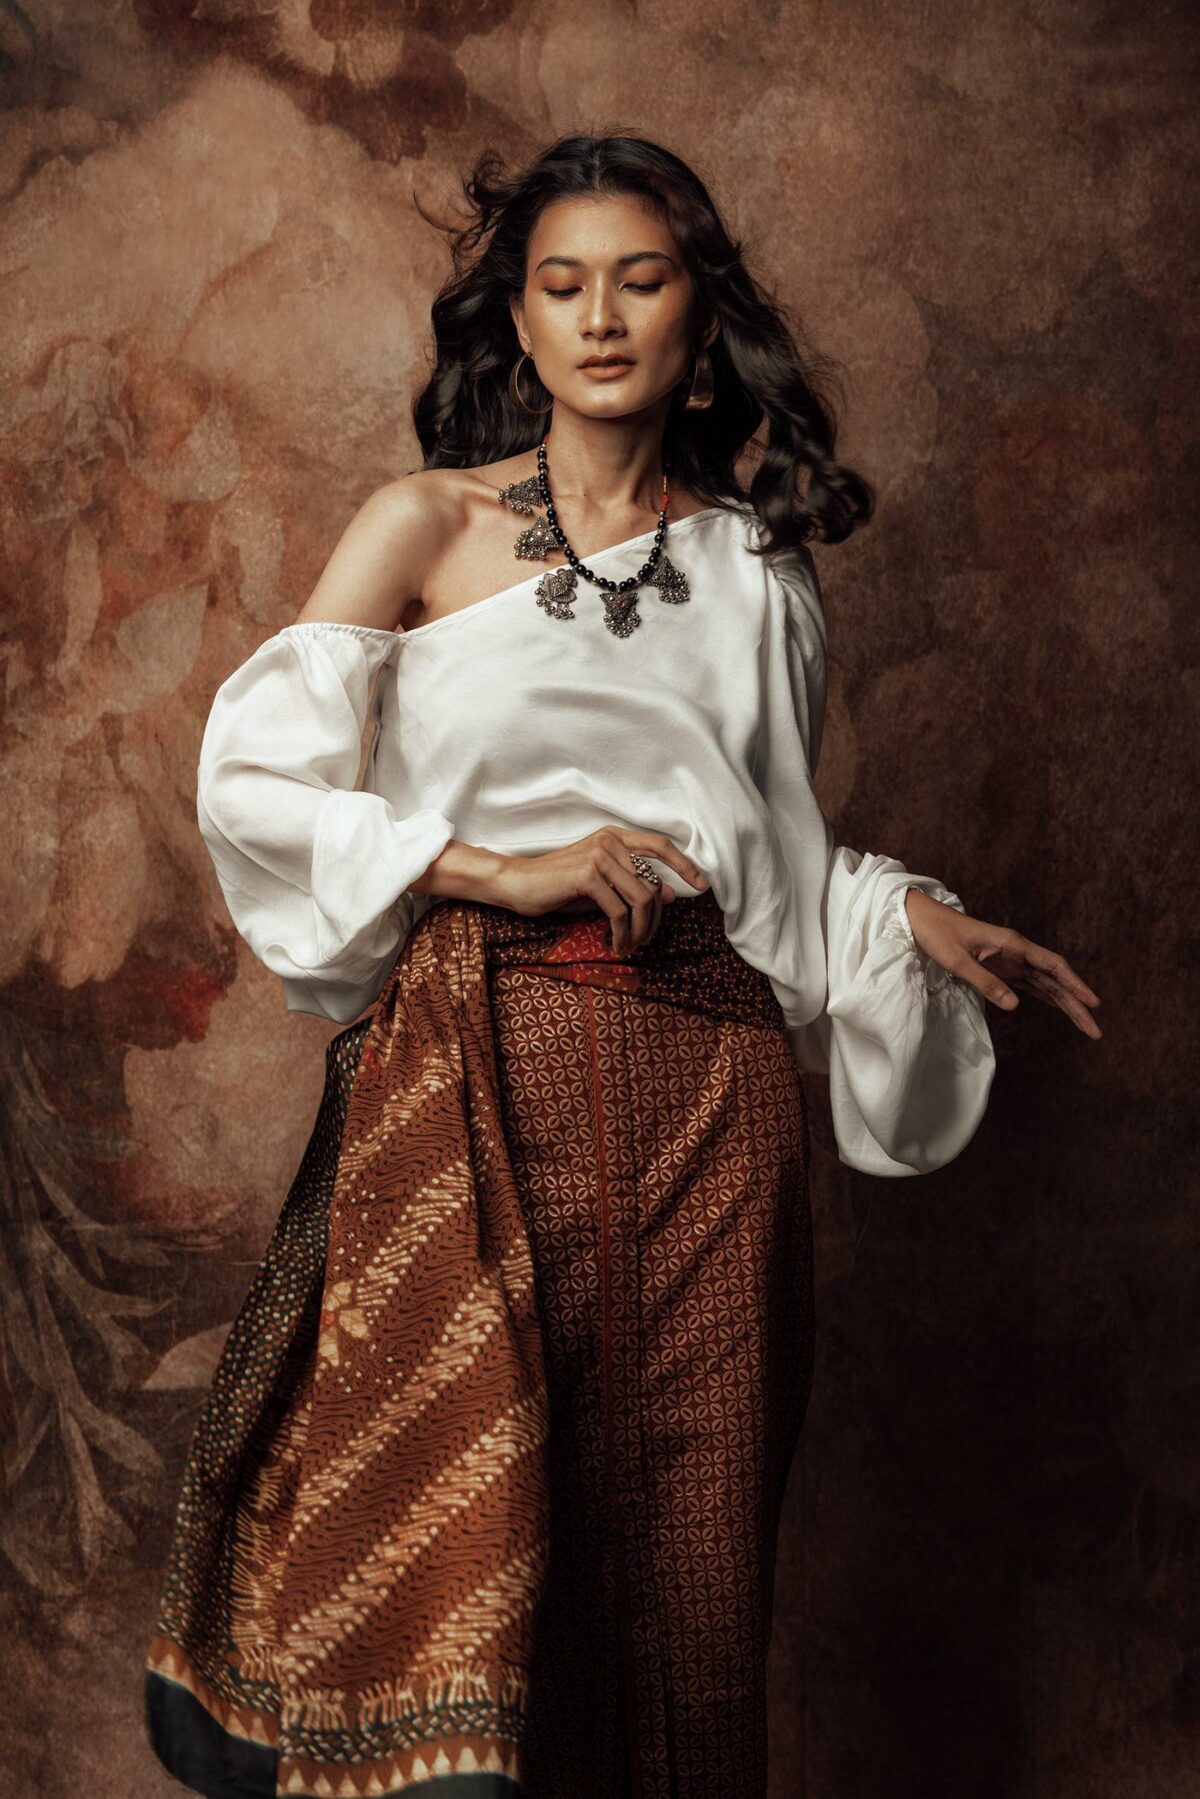 Project Puan A Gorgeous And Delicate Portrait Series On Indonesian Women By Nicoline Patricia Malina 5